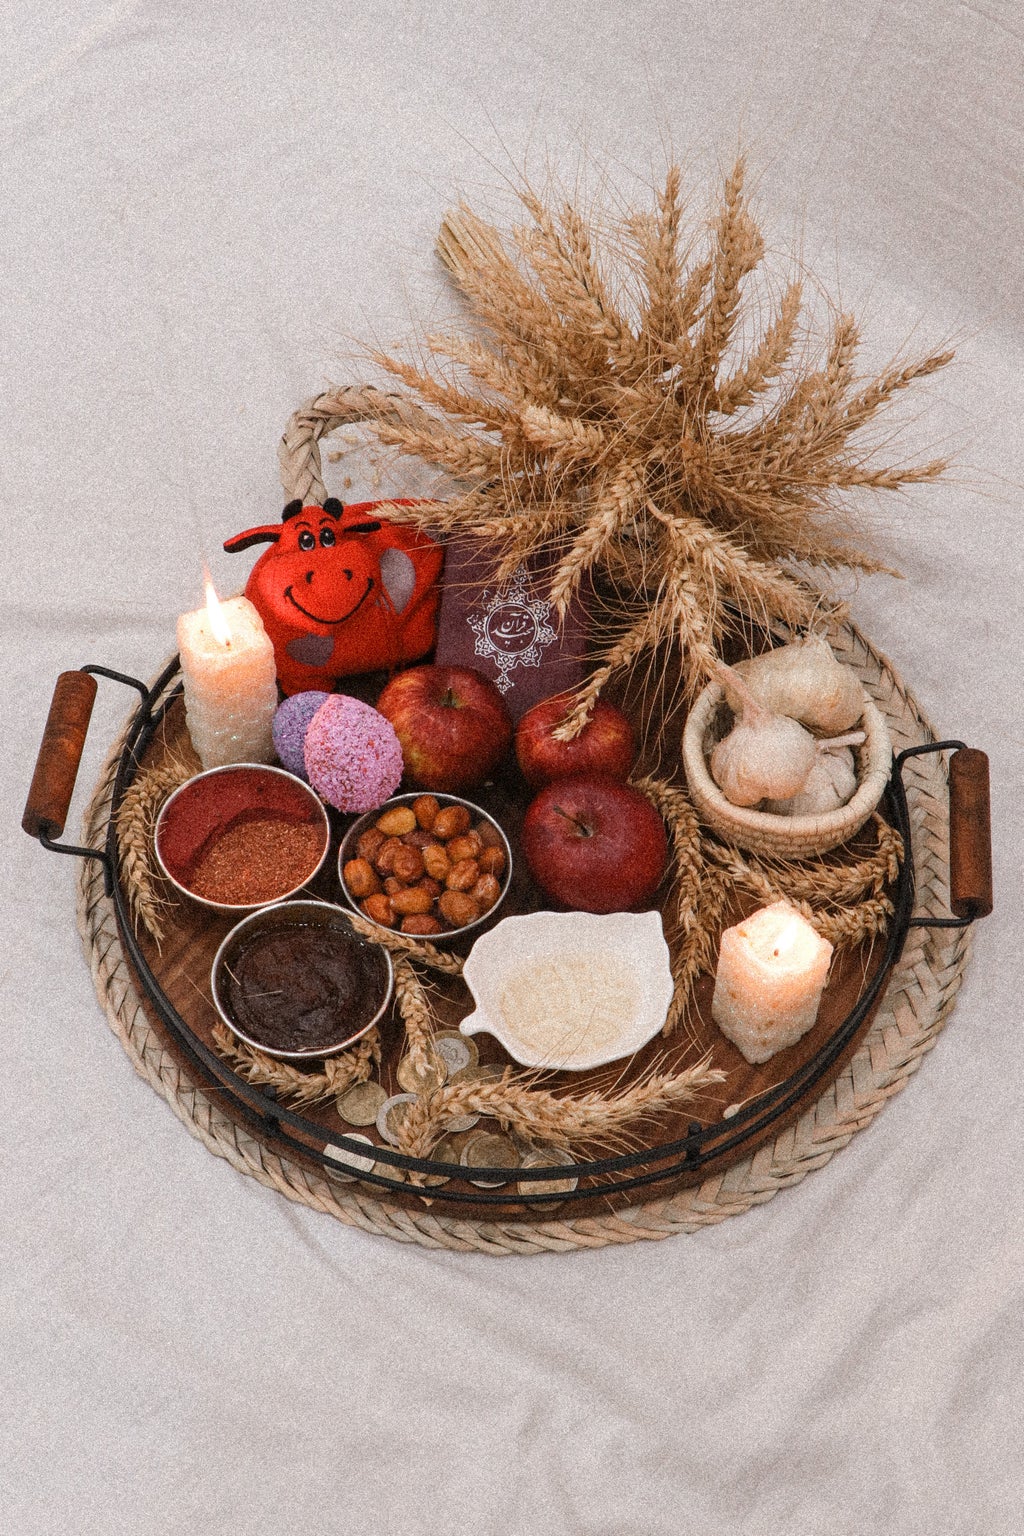 Red apples, lit candles, food, and other elements in a woven basket